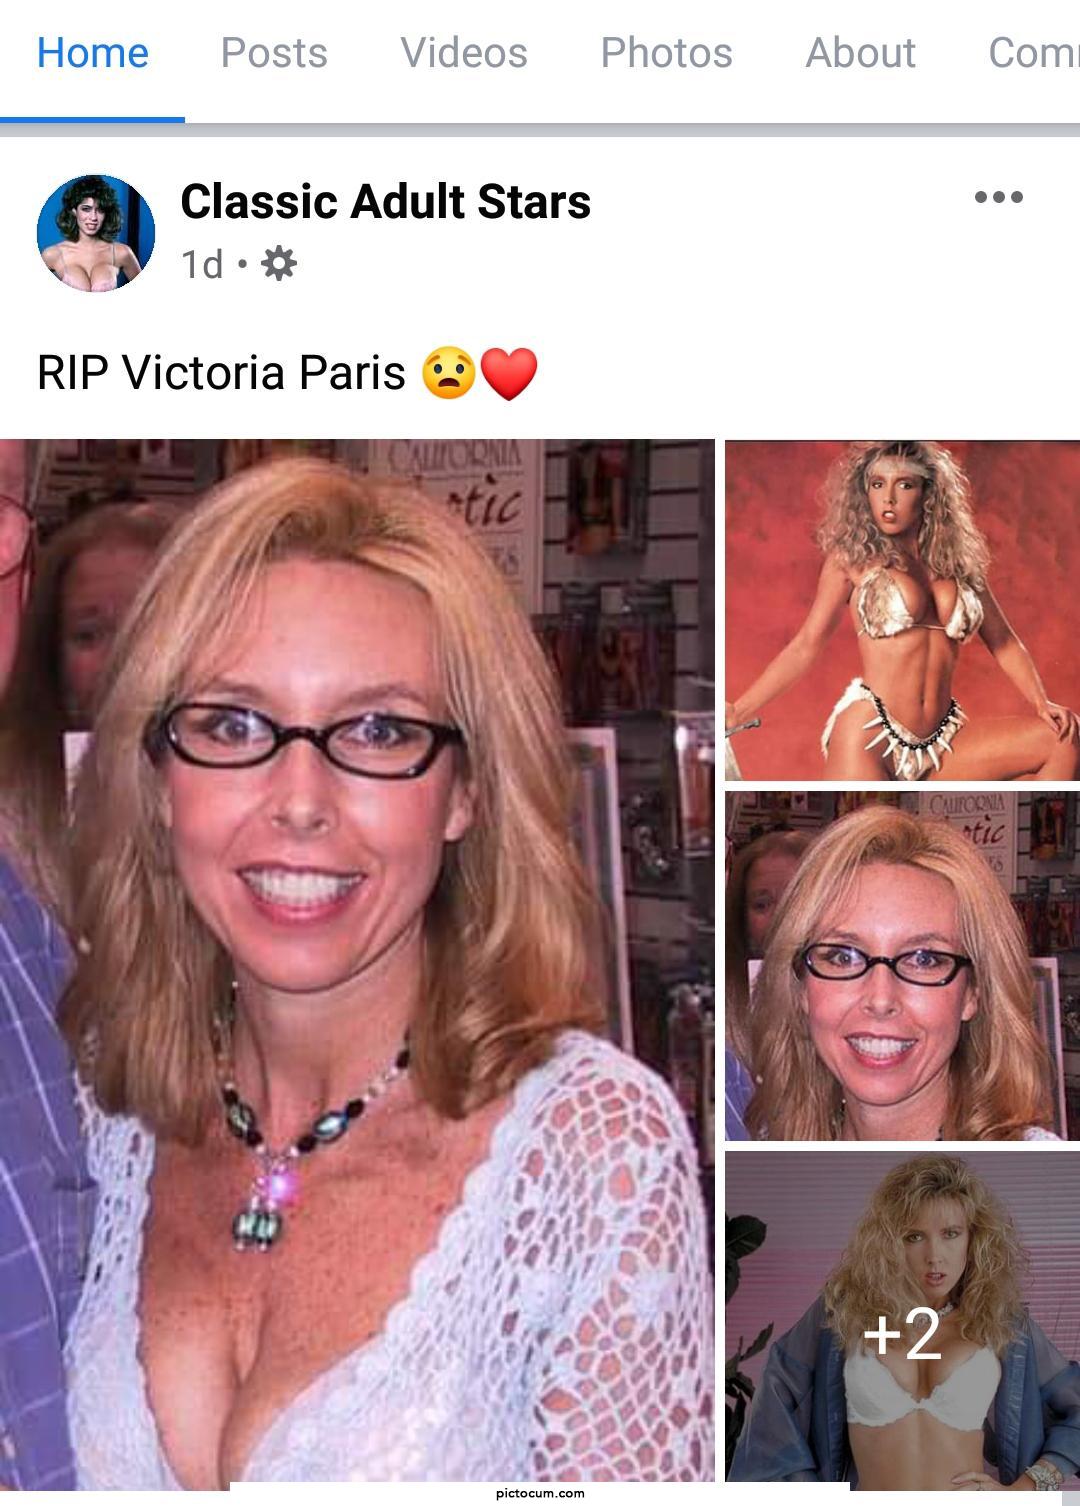 Yesterday the "Classic Adult Stars" FB page posted that 1980s legend Victoria Paris had passed away. Can anyone confirm this? I have seen nothing about it on AVN, Xbiz, etc. R.I.P. if true!